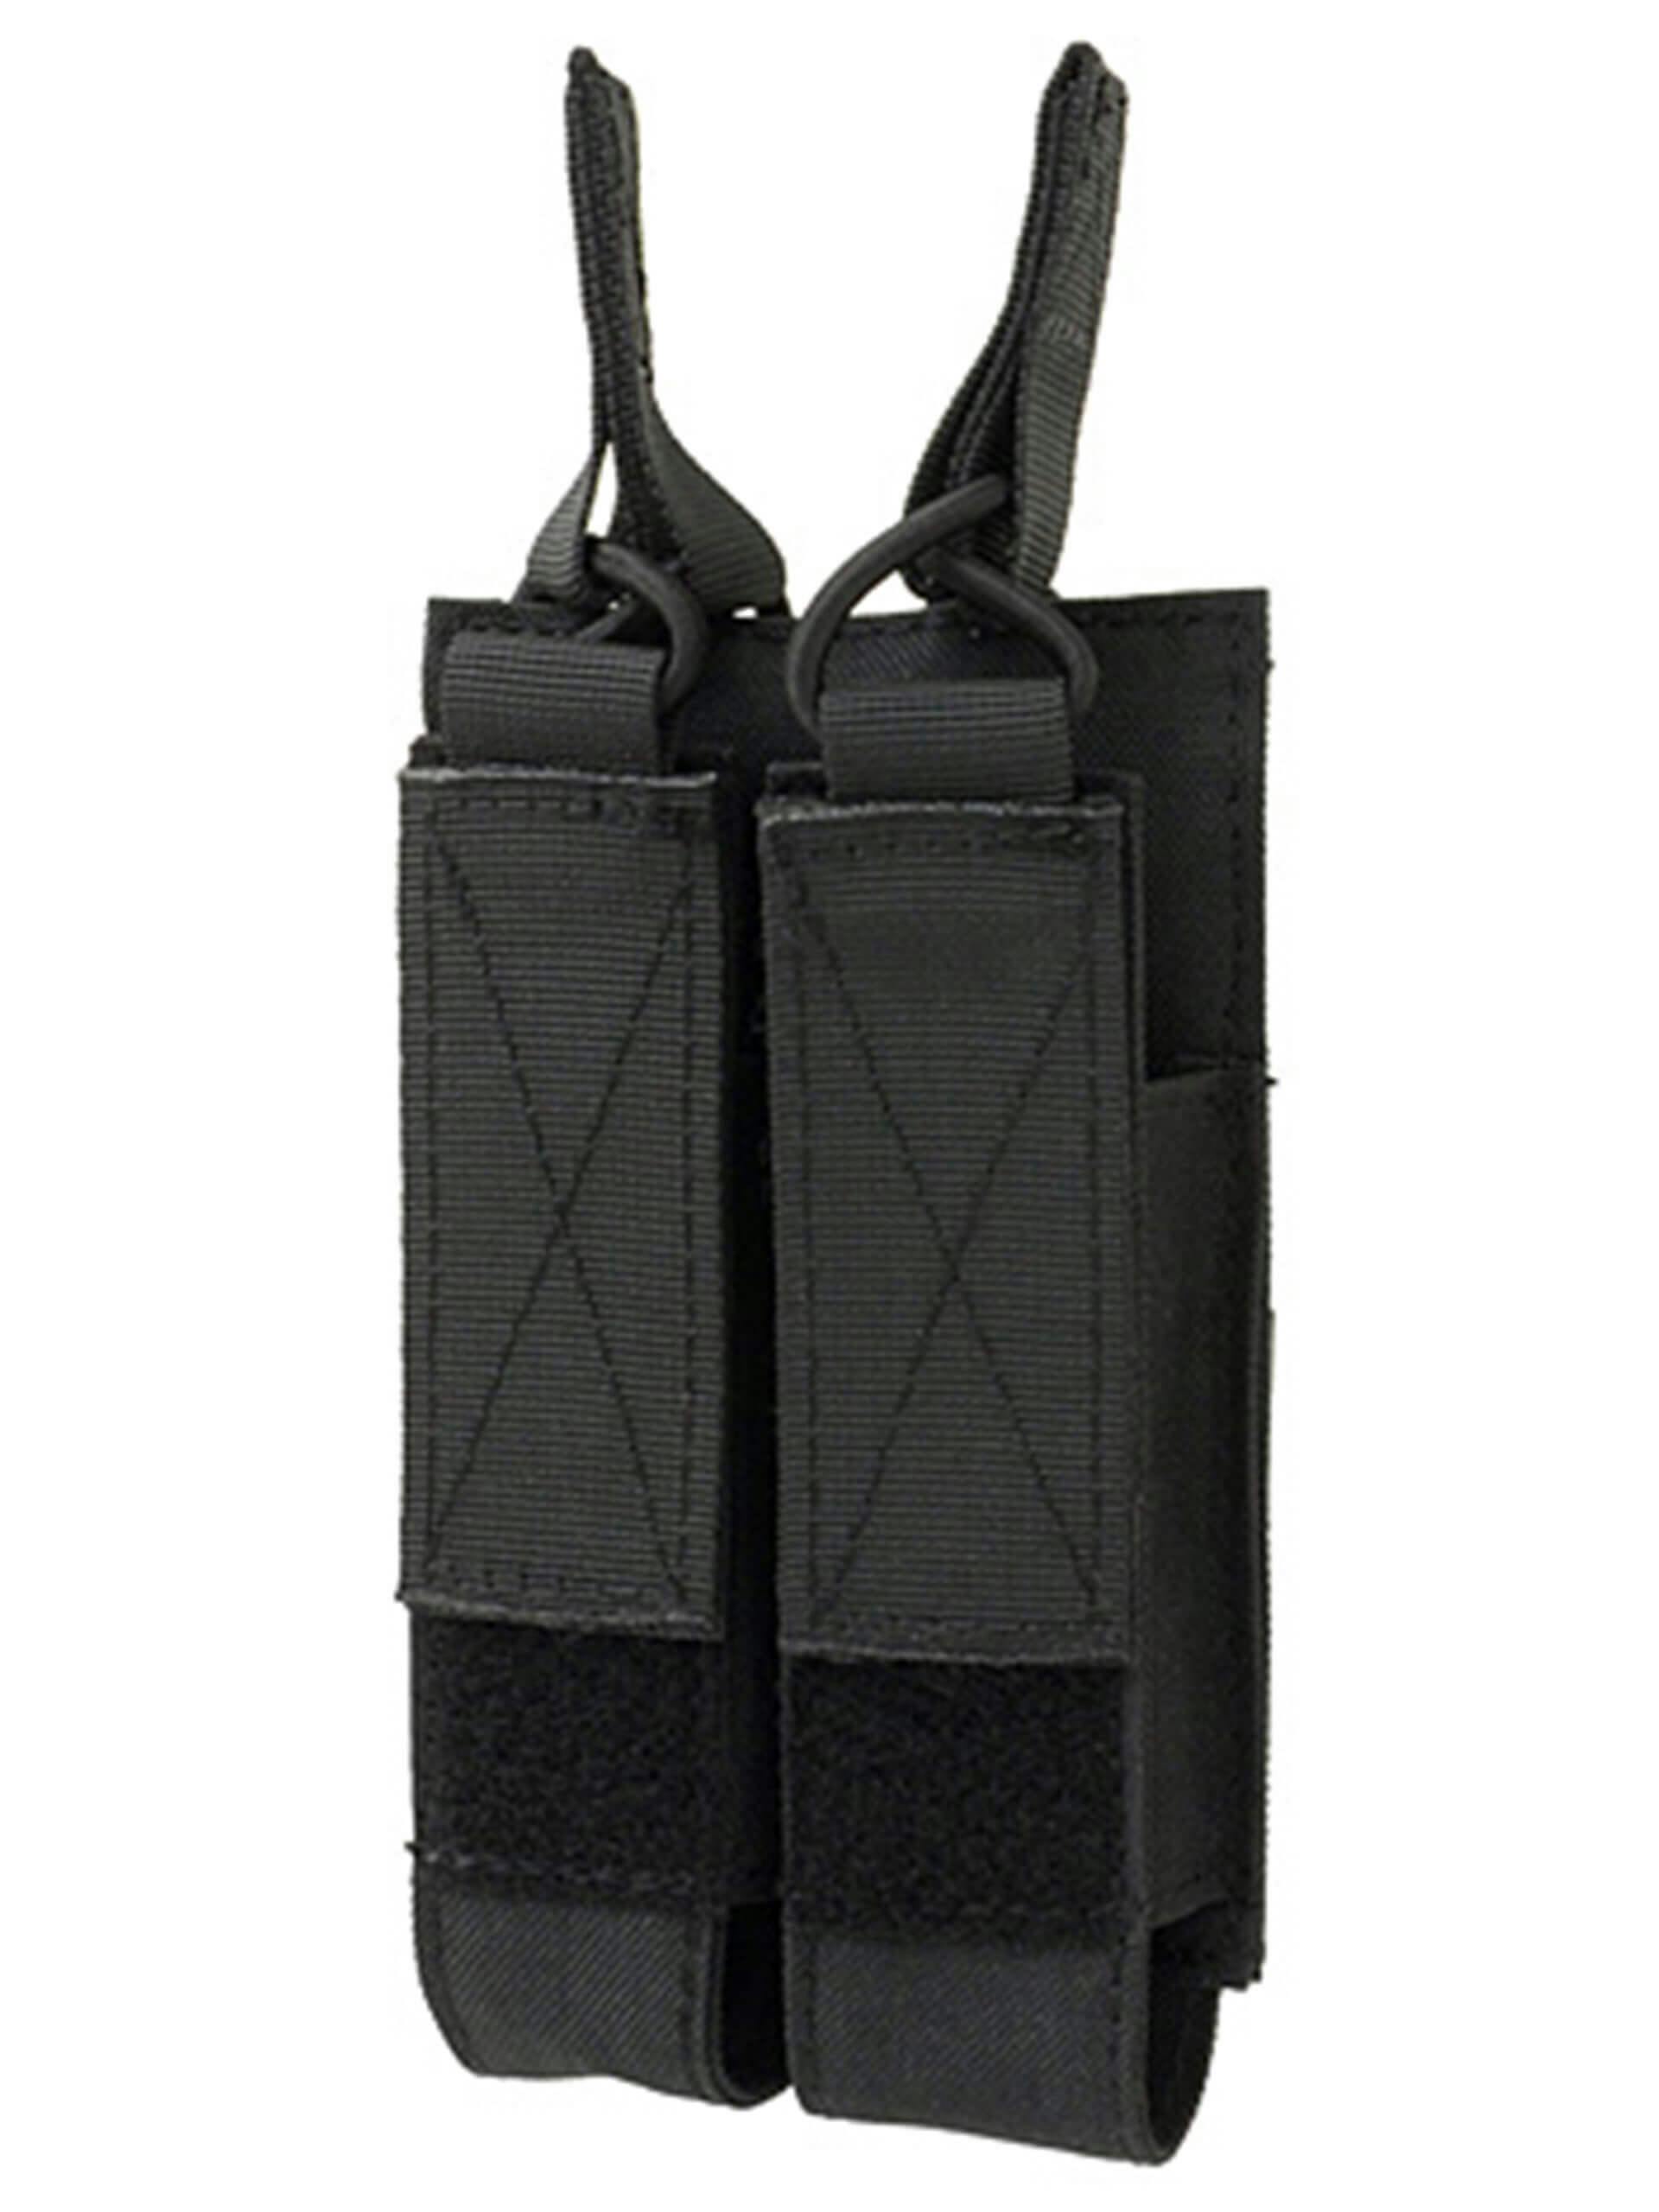 8Fields Tactical Double Magazine Pouch SMG-5/SMG-7